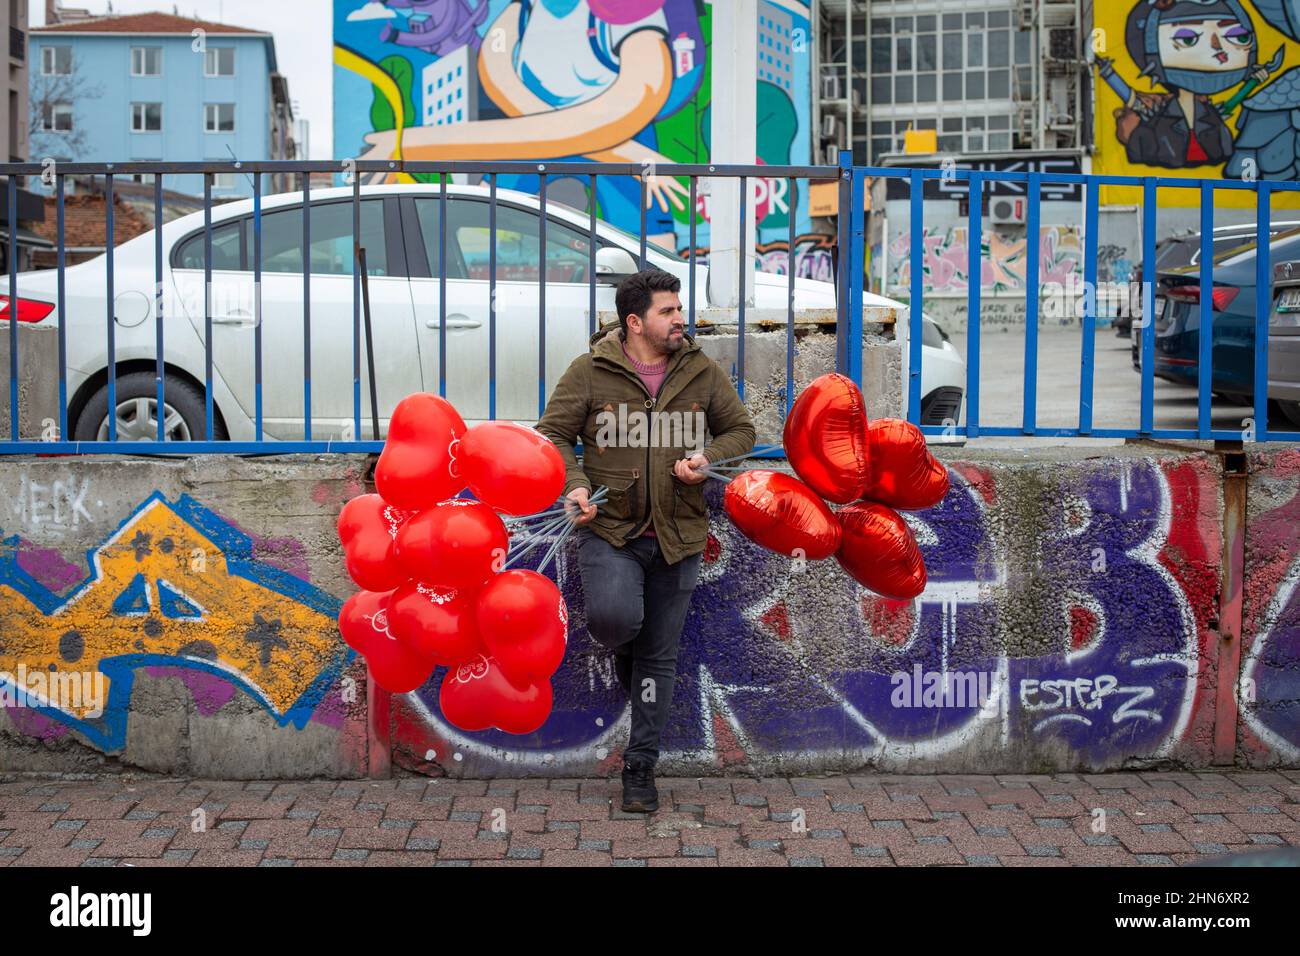 February 14, 2022: A peddler of balloons sells balloons for Valentine's Day  in Kadikoy. Turkey's economic woes have impacted flower and gift sales  ahead of Valentine's Day, as consumers have been forced